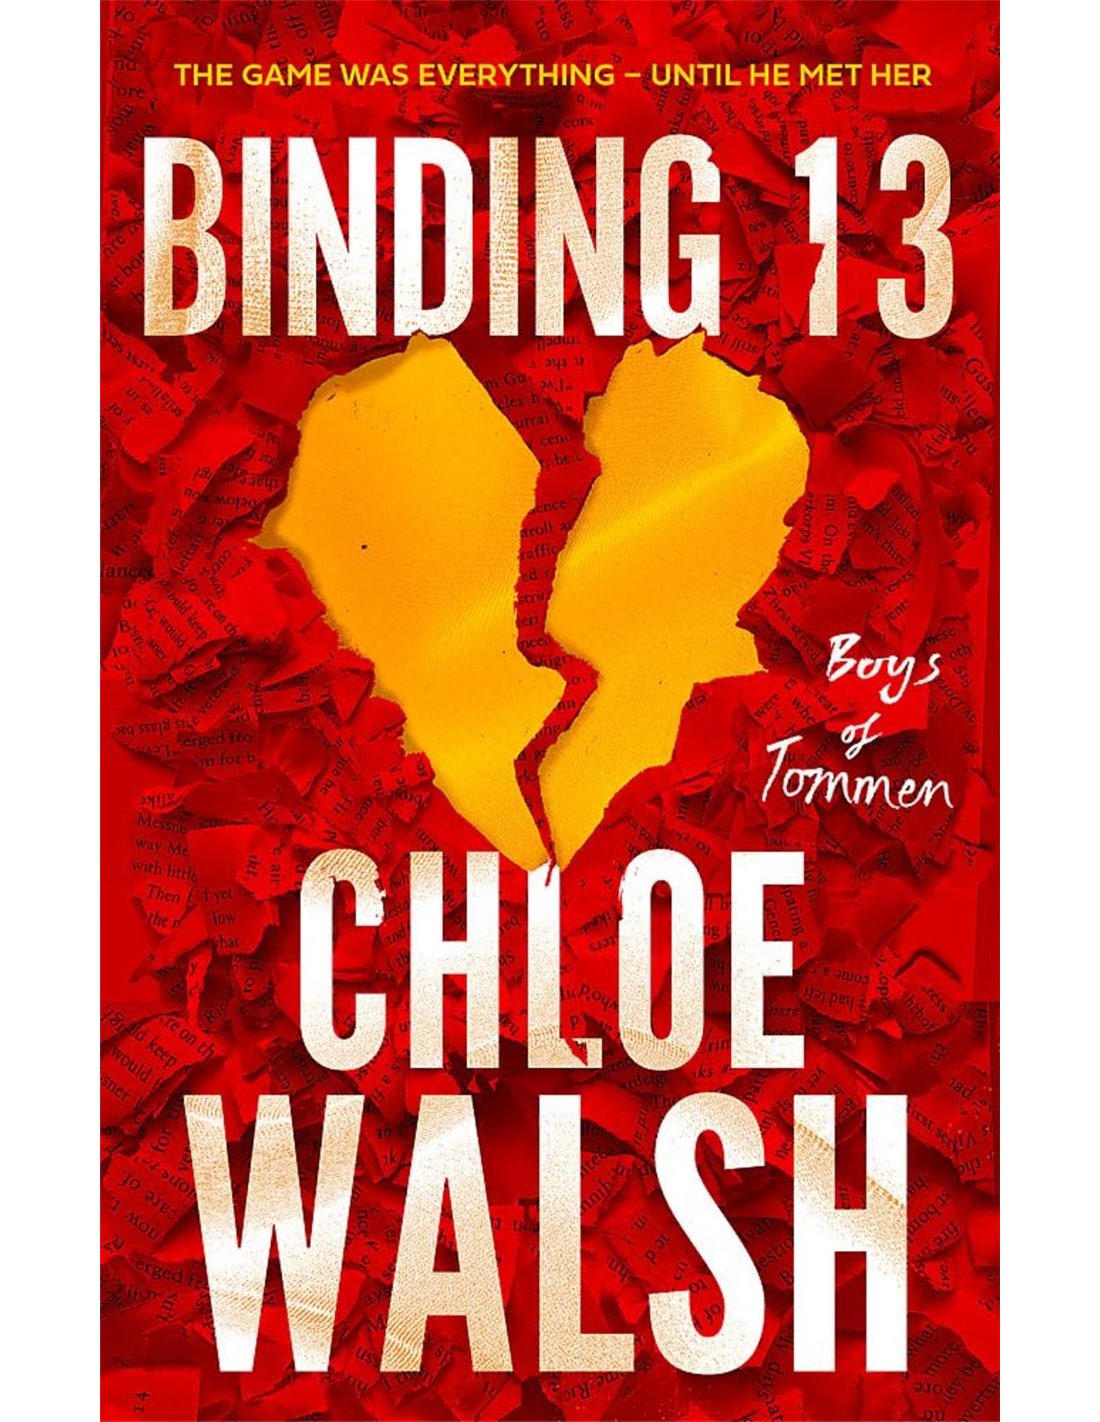 Where to Get Binding 13 Alternate Cover